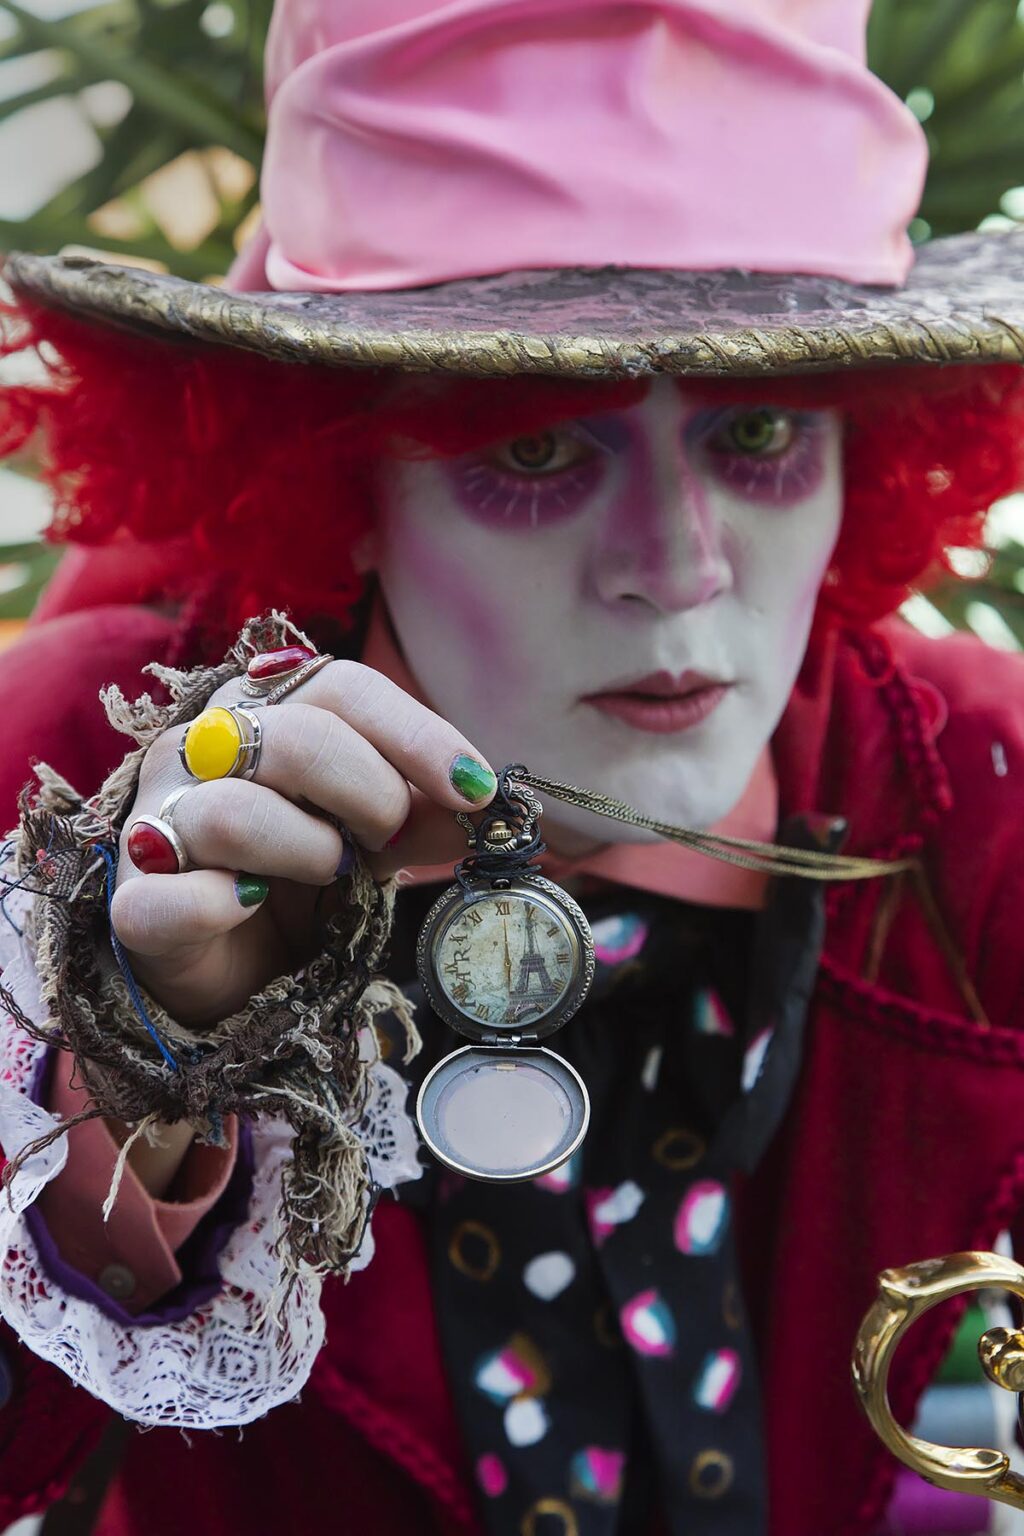 A street performer dressed as THE MAD HATTER of ALICE IN WONDERLAND during the Cervantino Festival - GUANAJUATO, MEXICO